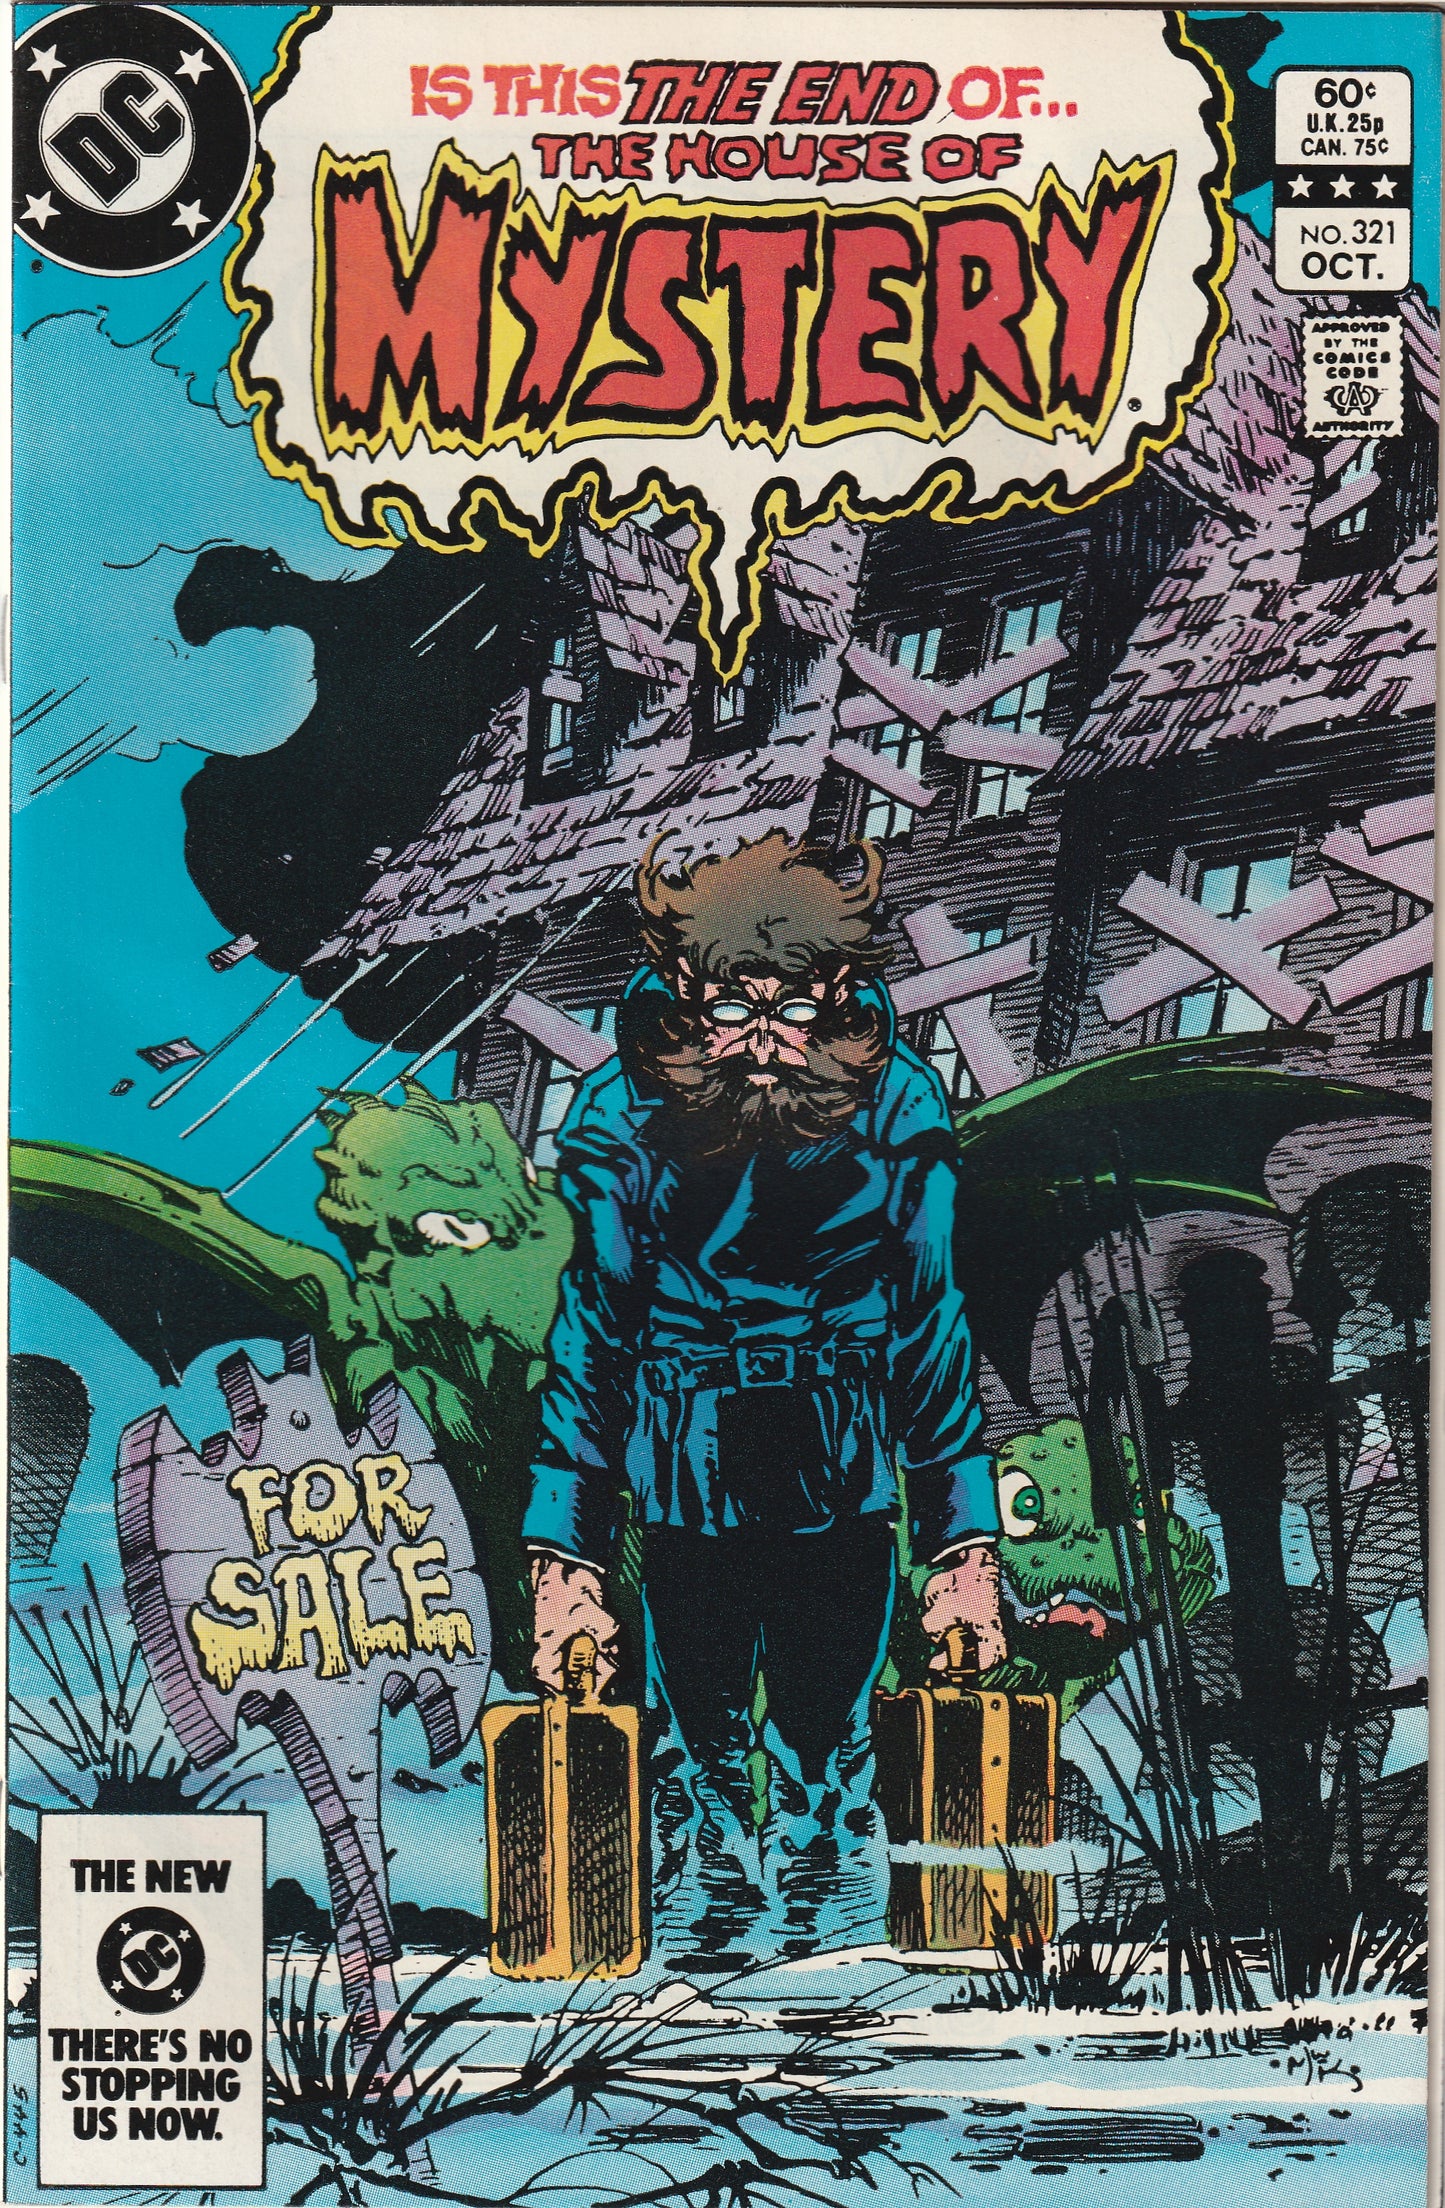 House of Mystery #321 (1983) - Final Issue, Death of I, Vampire